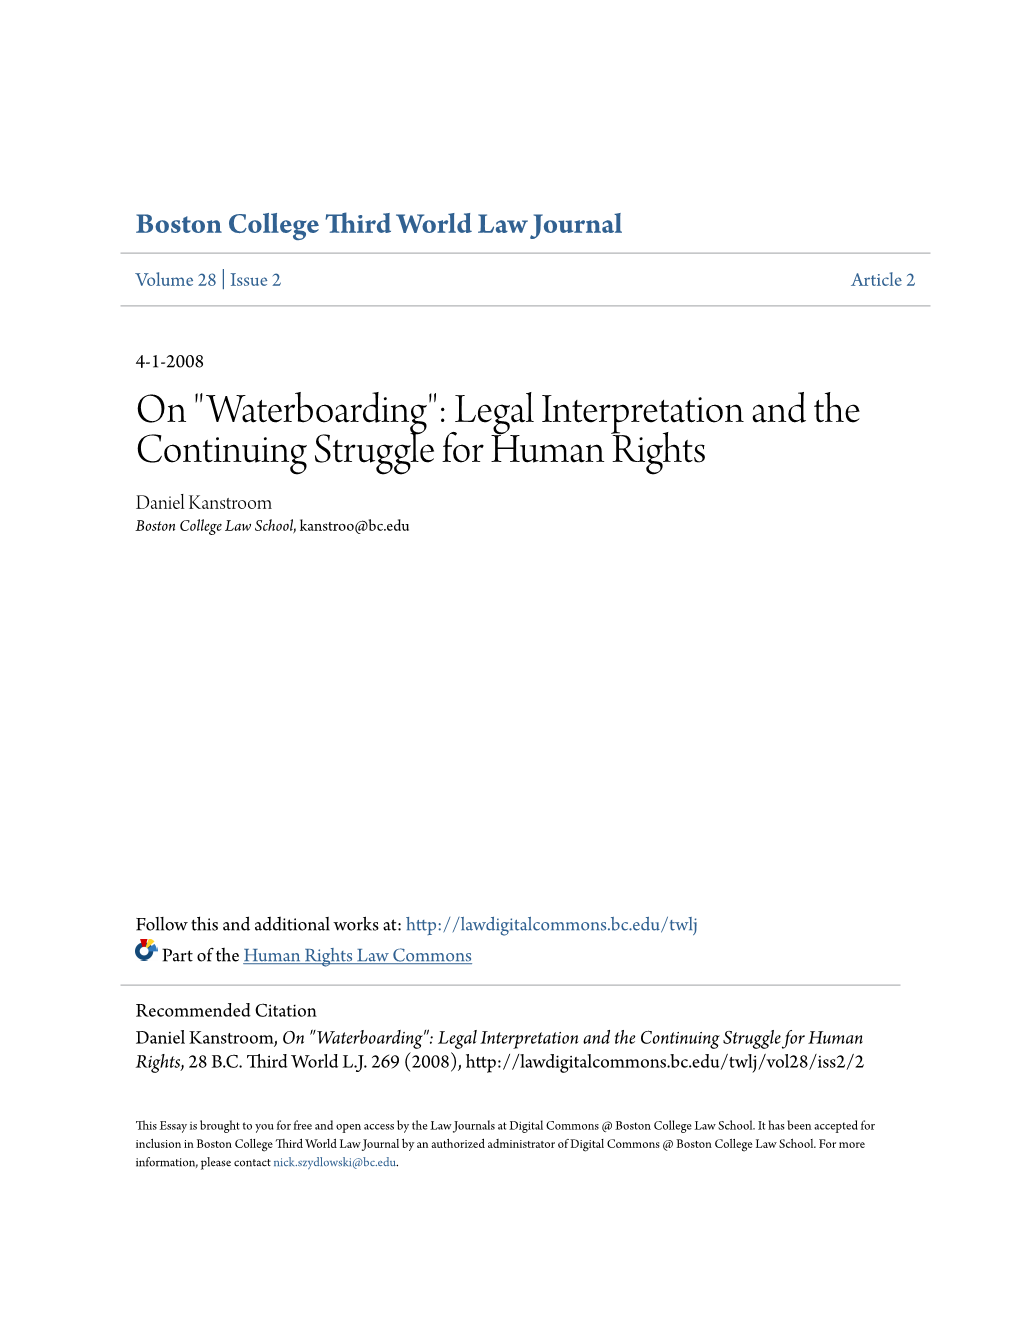 Legal Interpretation and the Continuing Struggle for Human Rights Daniel Kanstroom Boston College Law School, Kanstroo@Bc.Edu